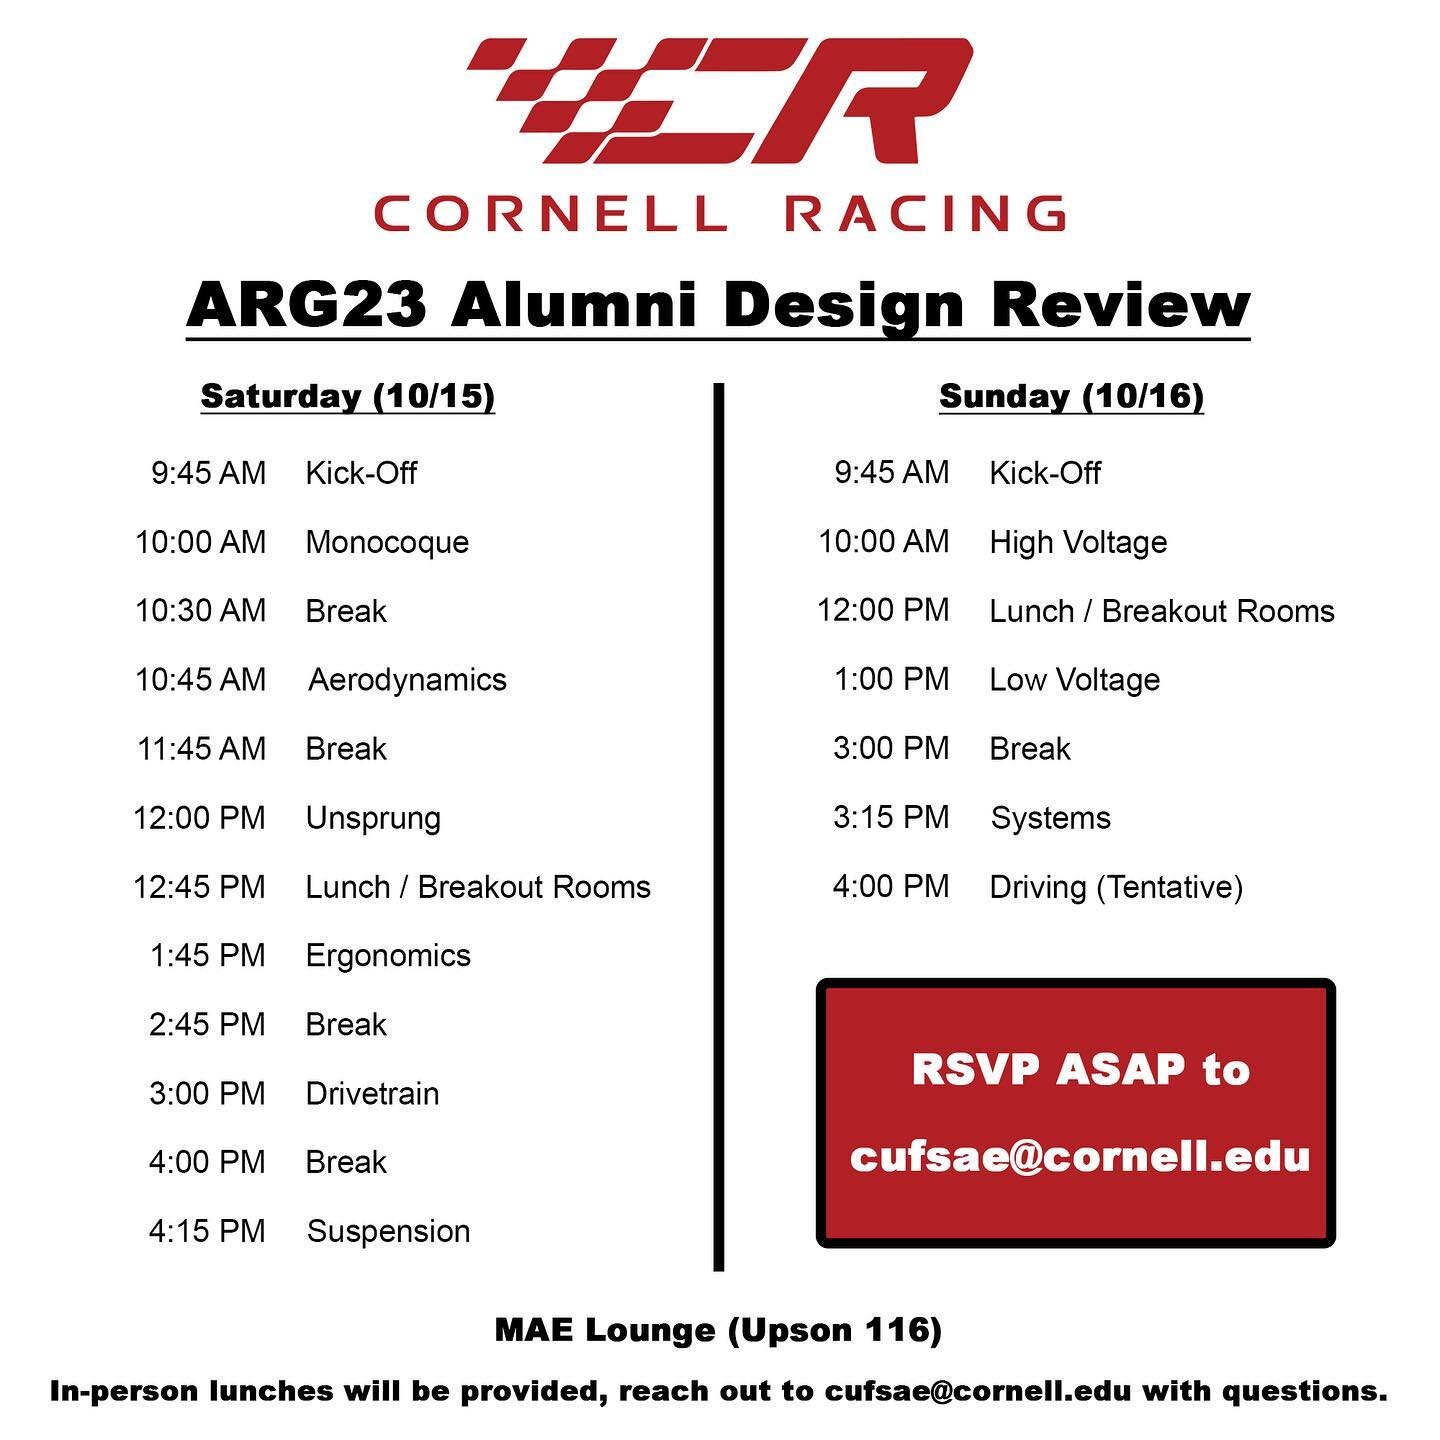 Let the grilling begin! ♨️🍖🥩🍔🌭🔥

Calling all alumni! It&rsquo;s that time of the year again, our annual alumni design review is this weekend.  We look forward to showcasing all aspects of ARG23&rsquo;s design and hopefully driving ARG22 on Sunda